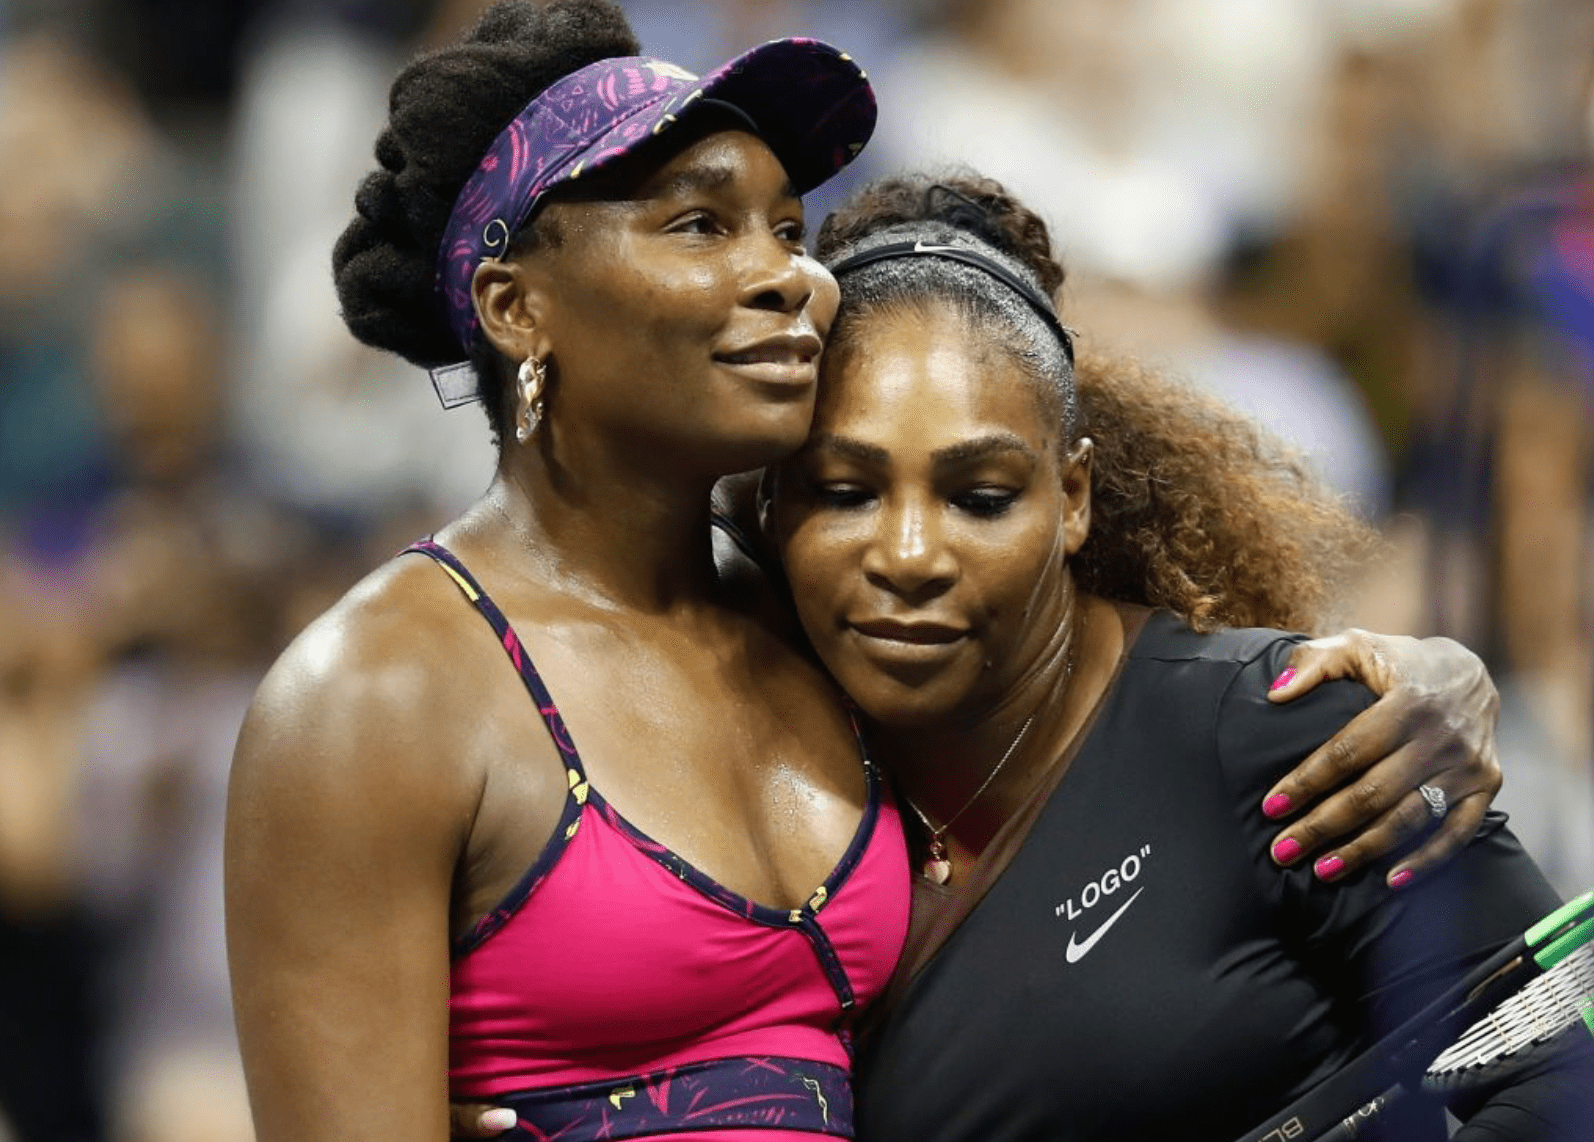 Serena Williams and sister Venus Williams share a hug after their third round match in the US Open on August 2018. | Source: Getty Images